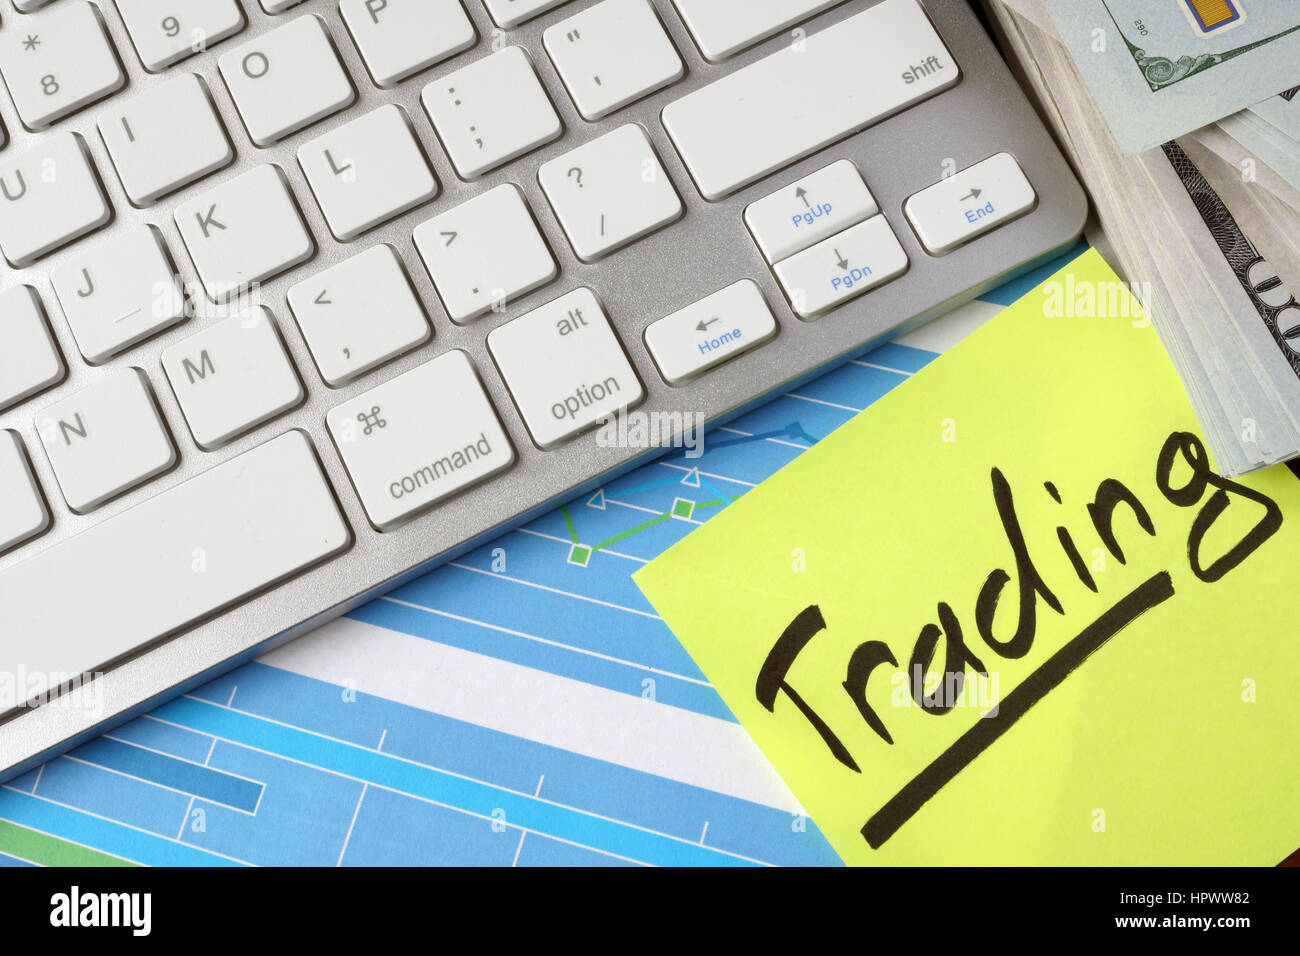 Paper with word Trading, cash, keyboard and business charts. Stock Photo